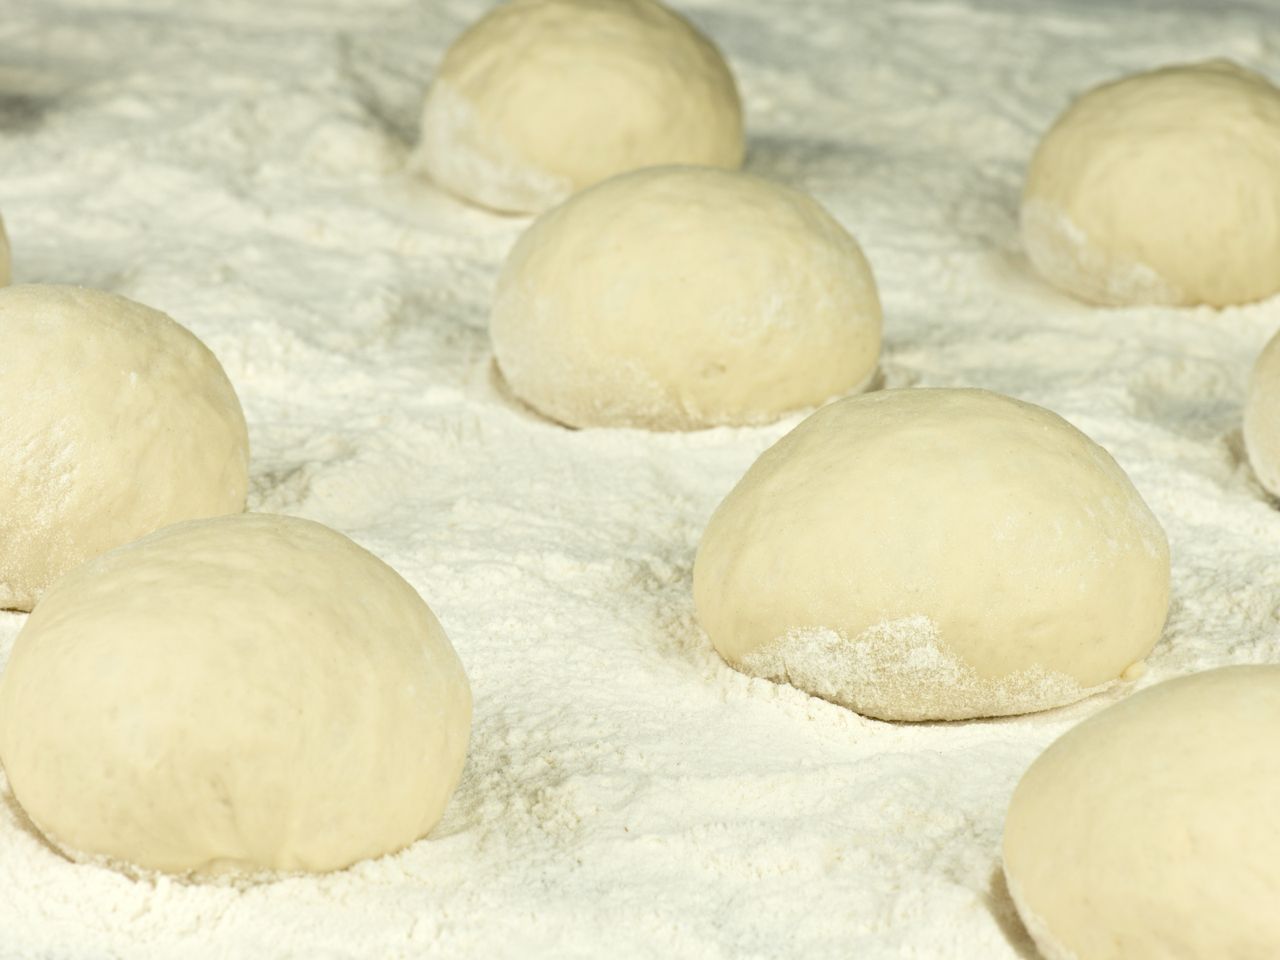 Reviving old kitchen tricks: Using a fork can perfect your yeast dough pastries